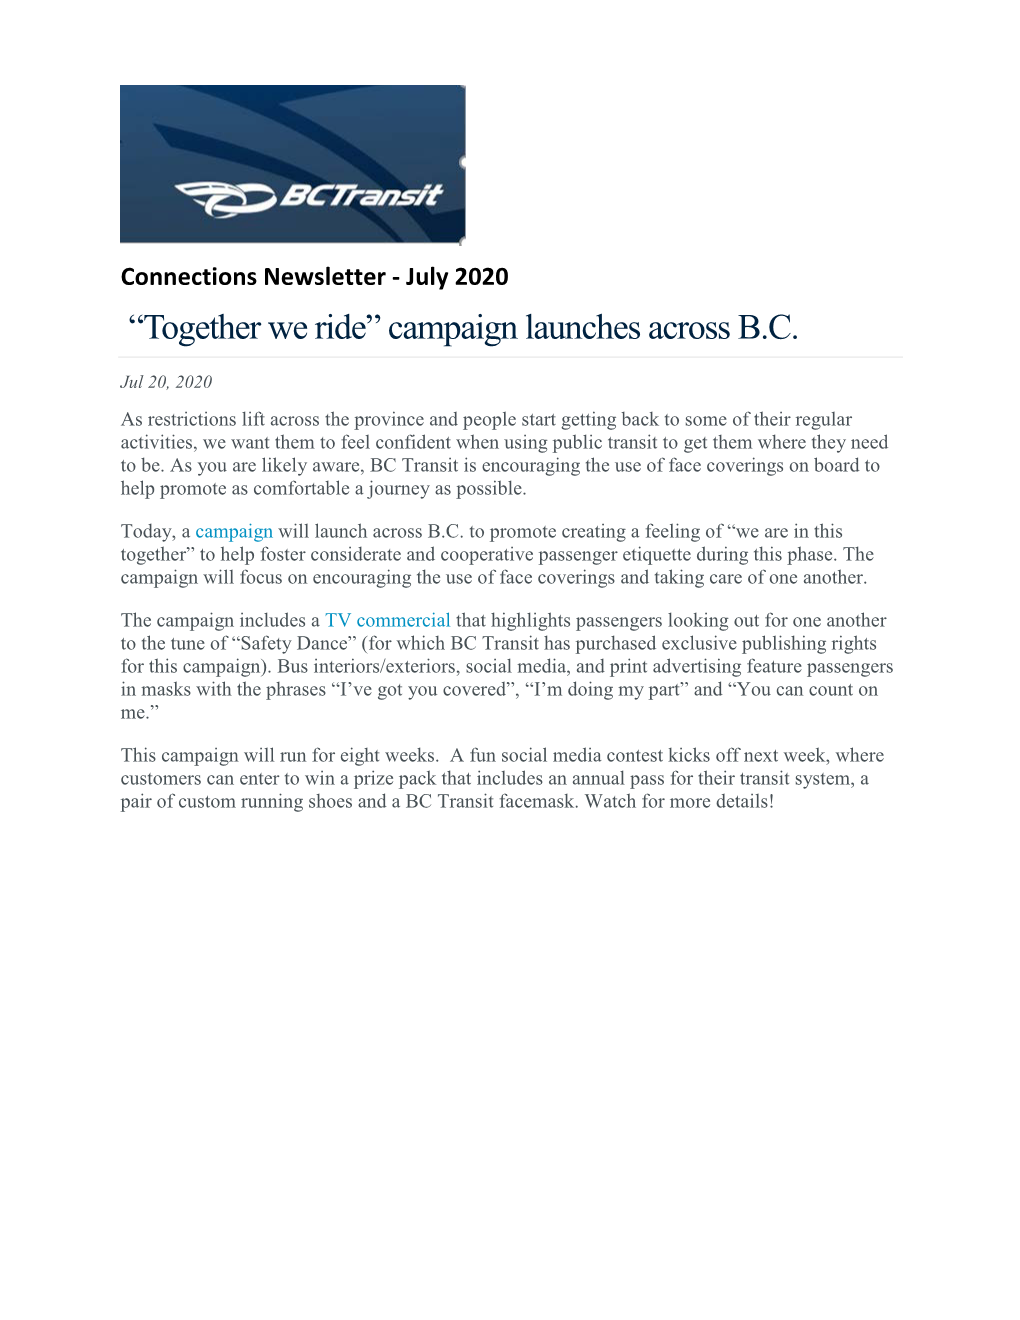 July 2020 “Together We Ride” Campaign Launches Across B.C